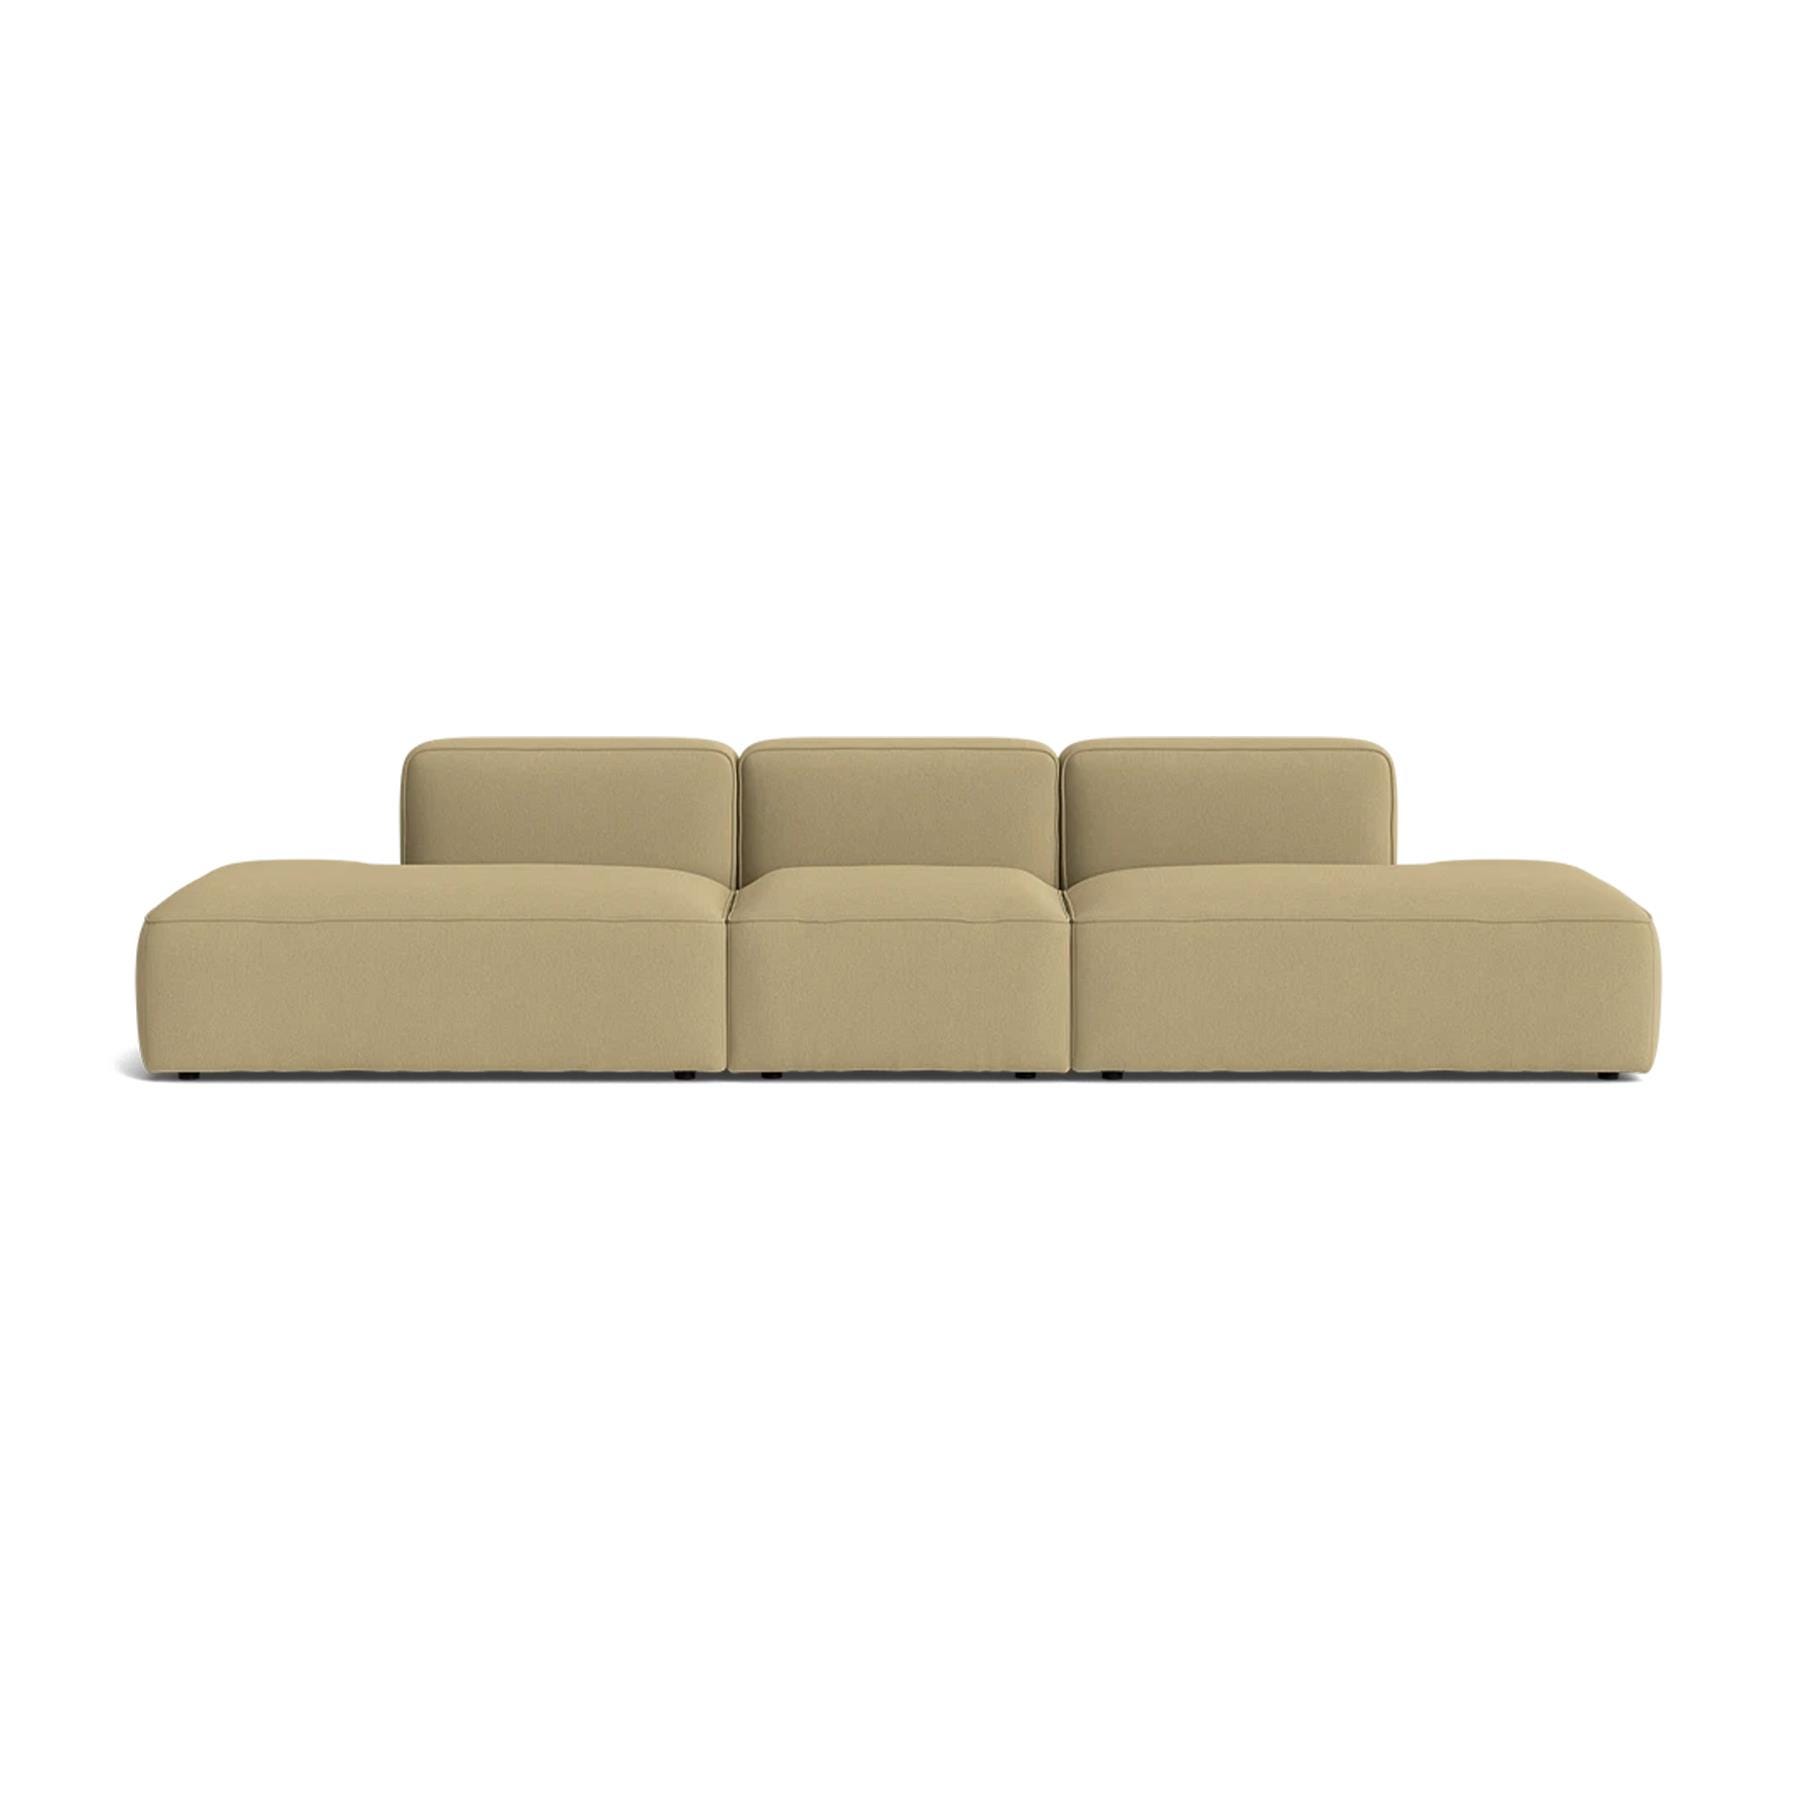 Make Nordic Basecamp Midt Open Sofa Fiord 422 Yellow Designer Furniture From Holloways Of Ludlow